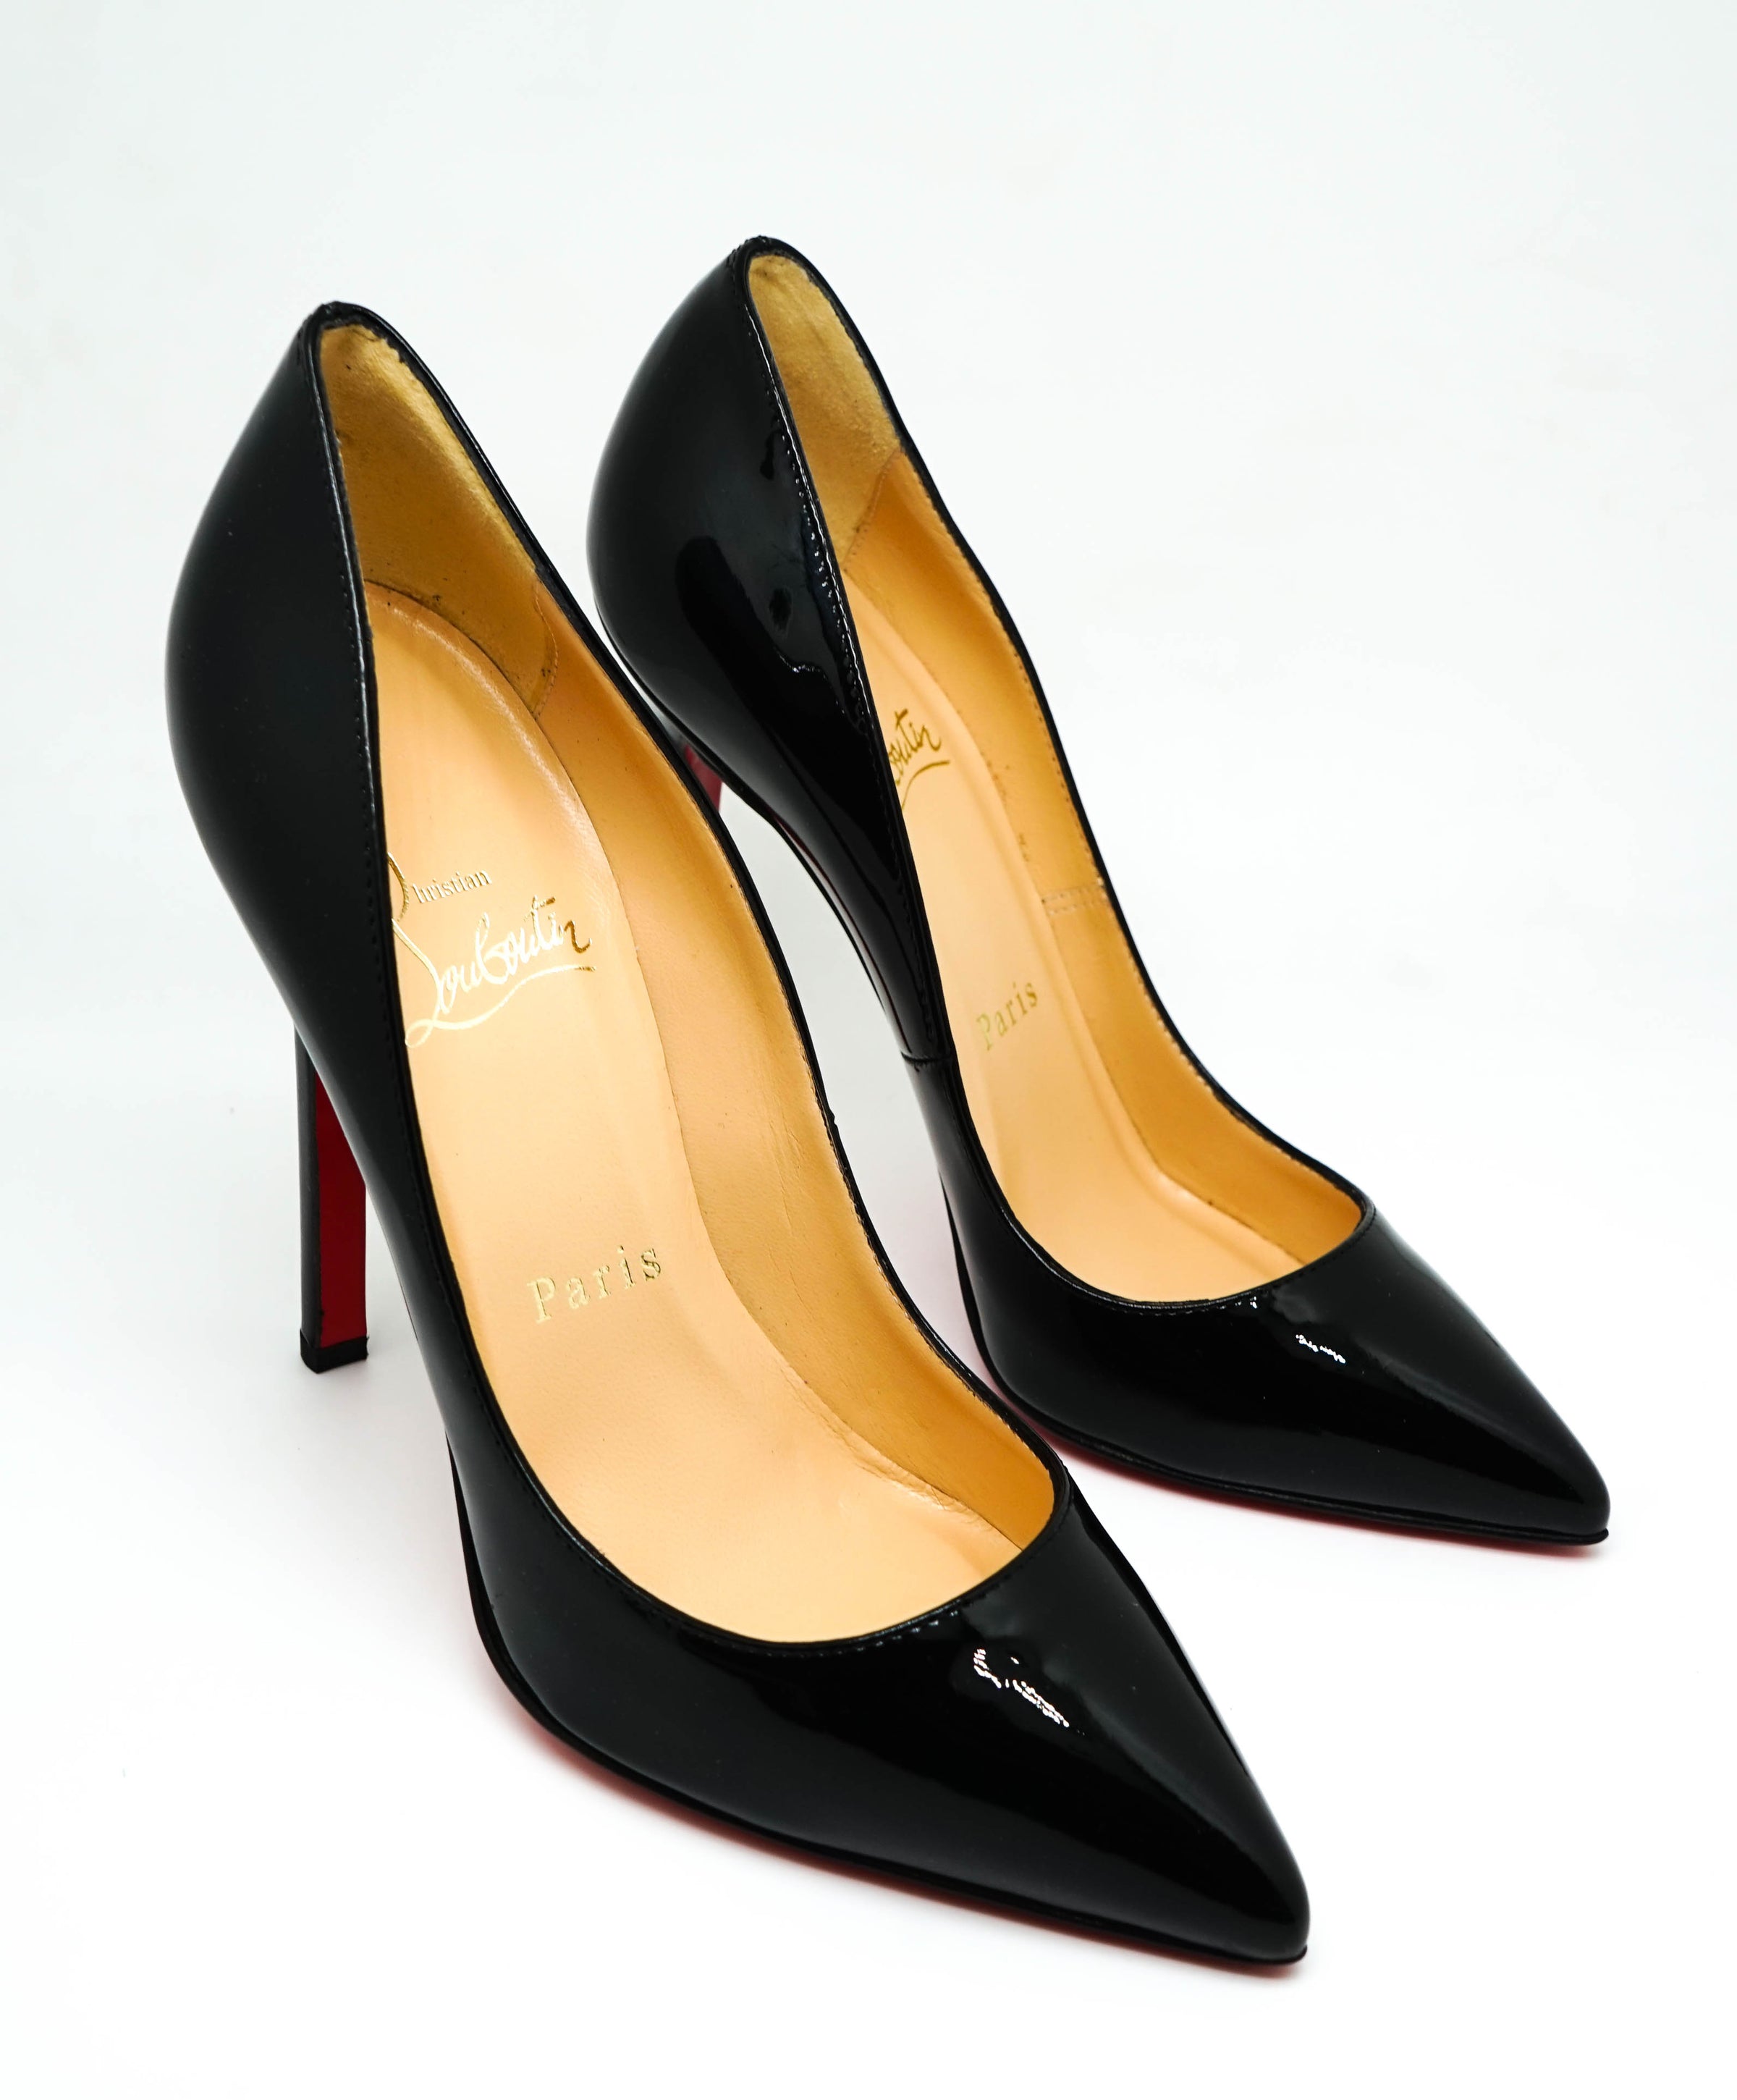 Christian Louboutin 'So Kate' 120mm stripped patent leather pumps